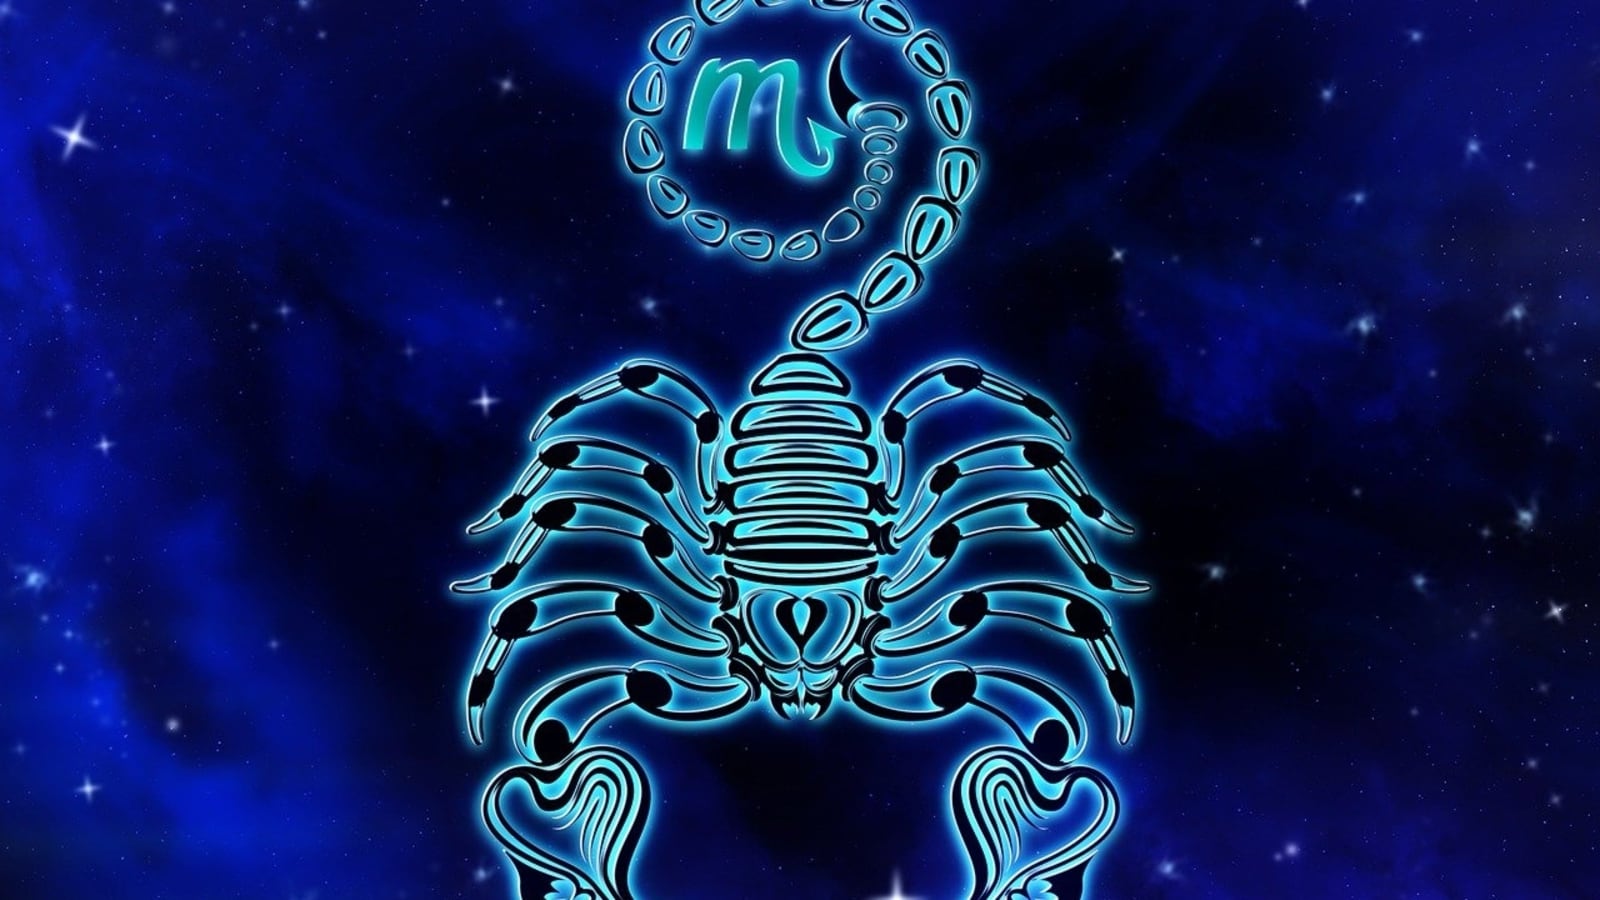 Scorpio Daily Horoscope Today, August 14, 2023 predicts good financial matters